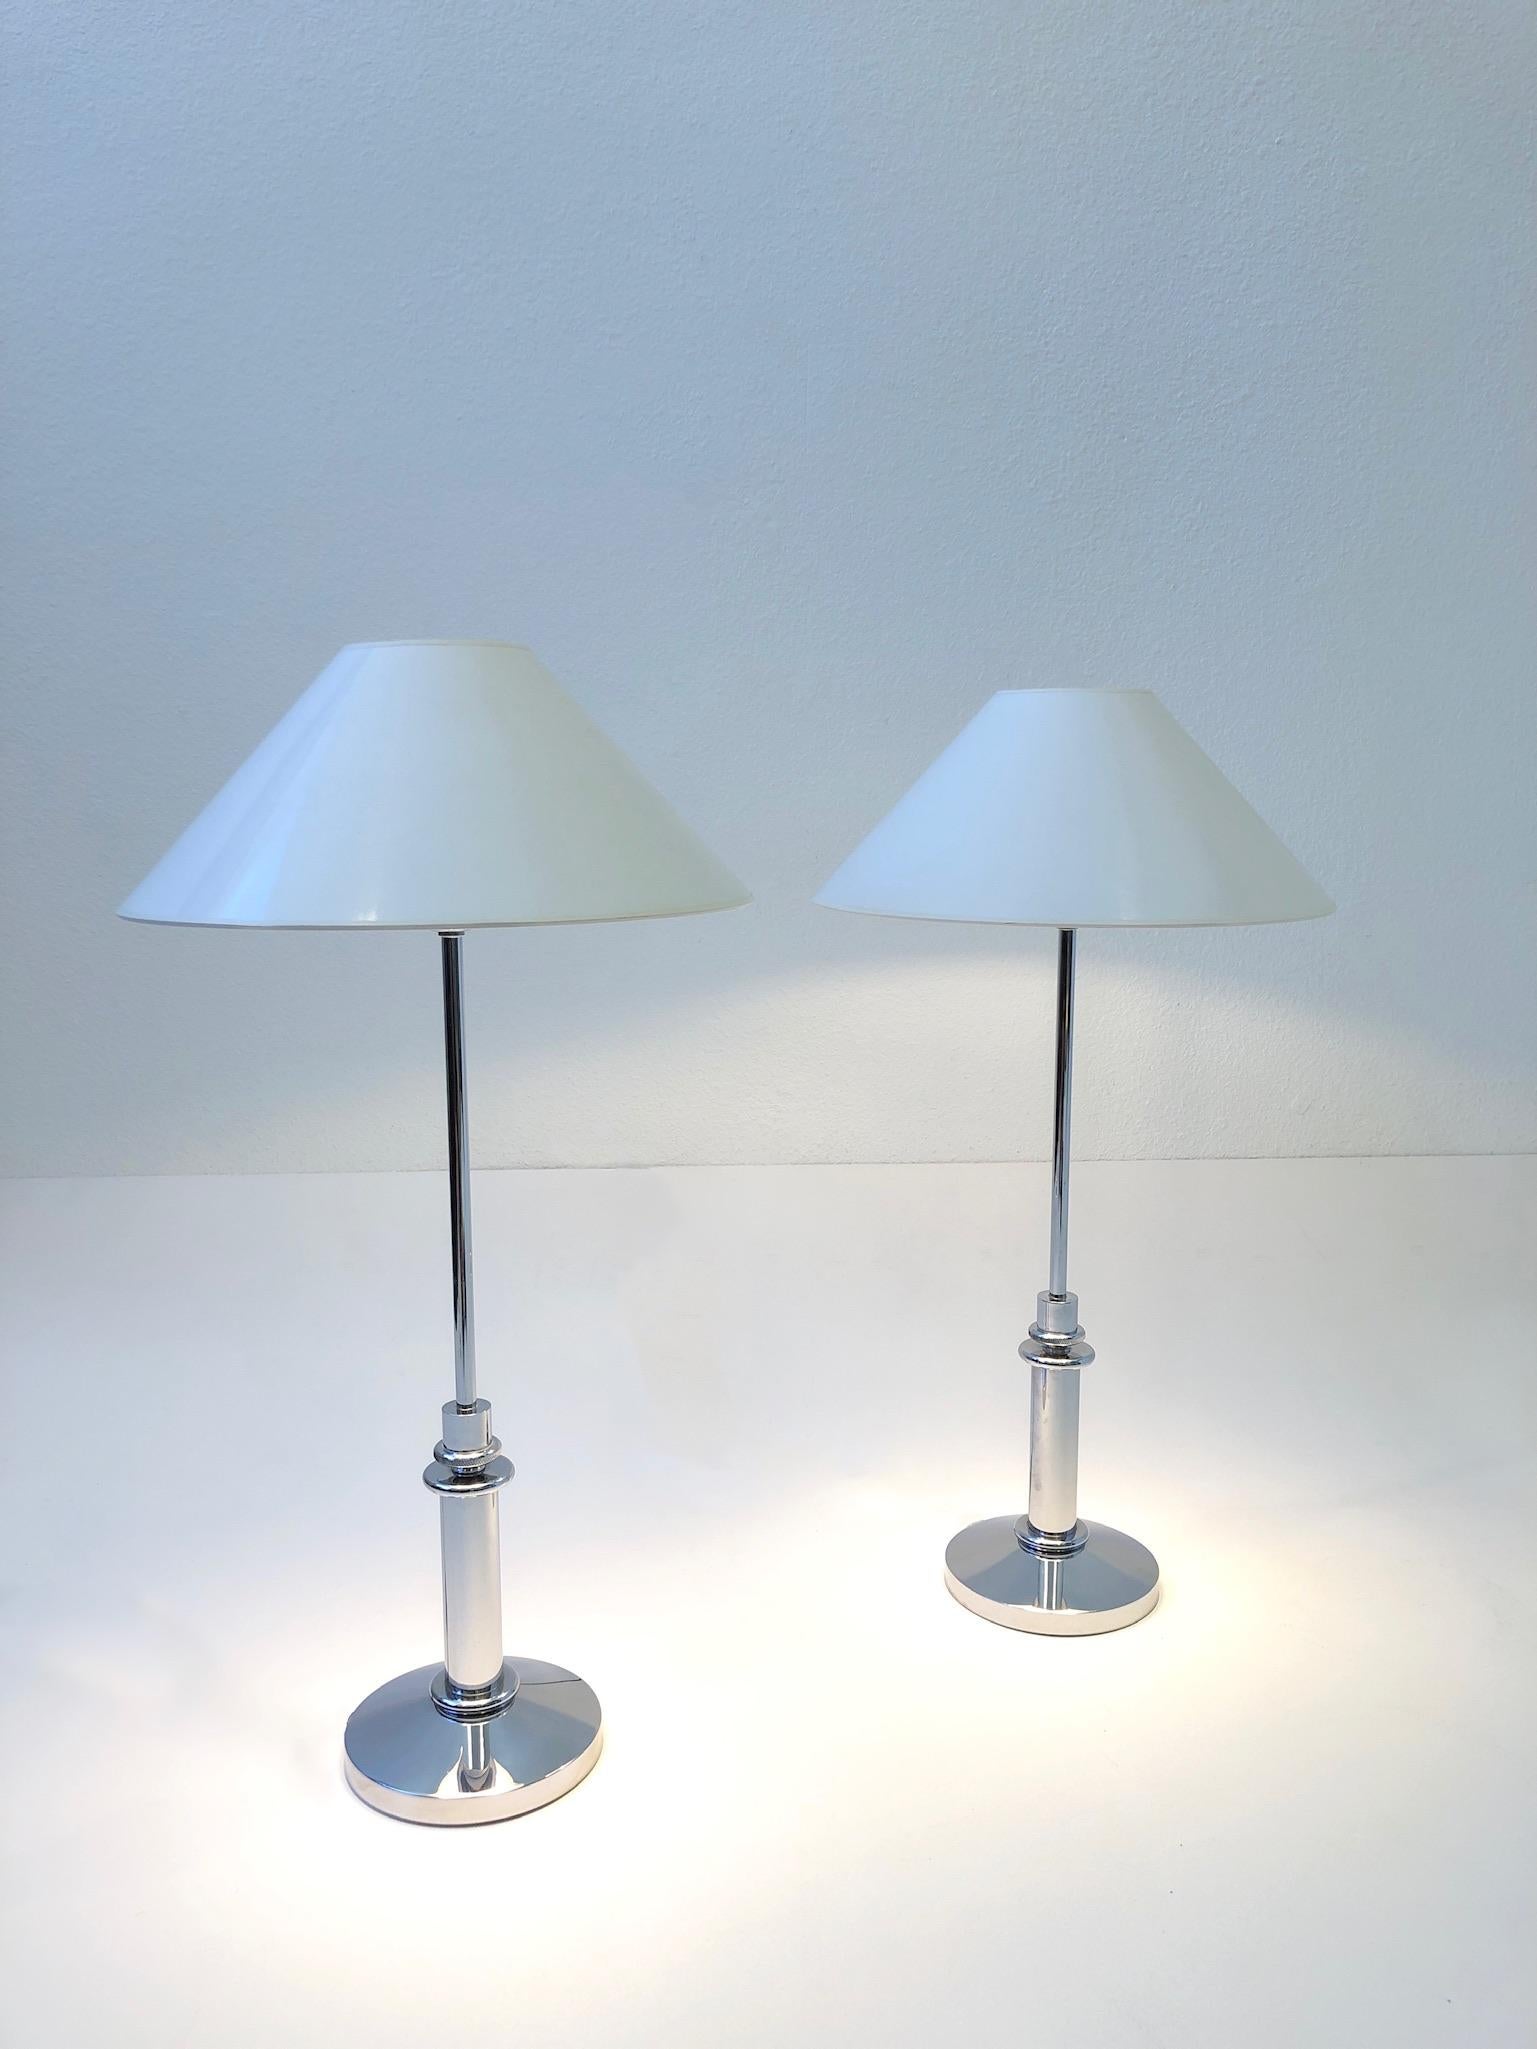 French pair of polish chrome “Olympe” table lamps by Mirak.
The lamps are in original condition. It takes one small Edison lightbulb.
Measurements: 25.5” high, 14” diameter. Base is 6” diameter.